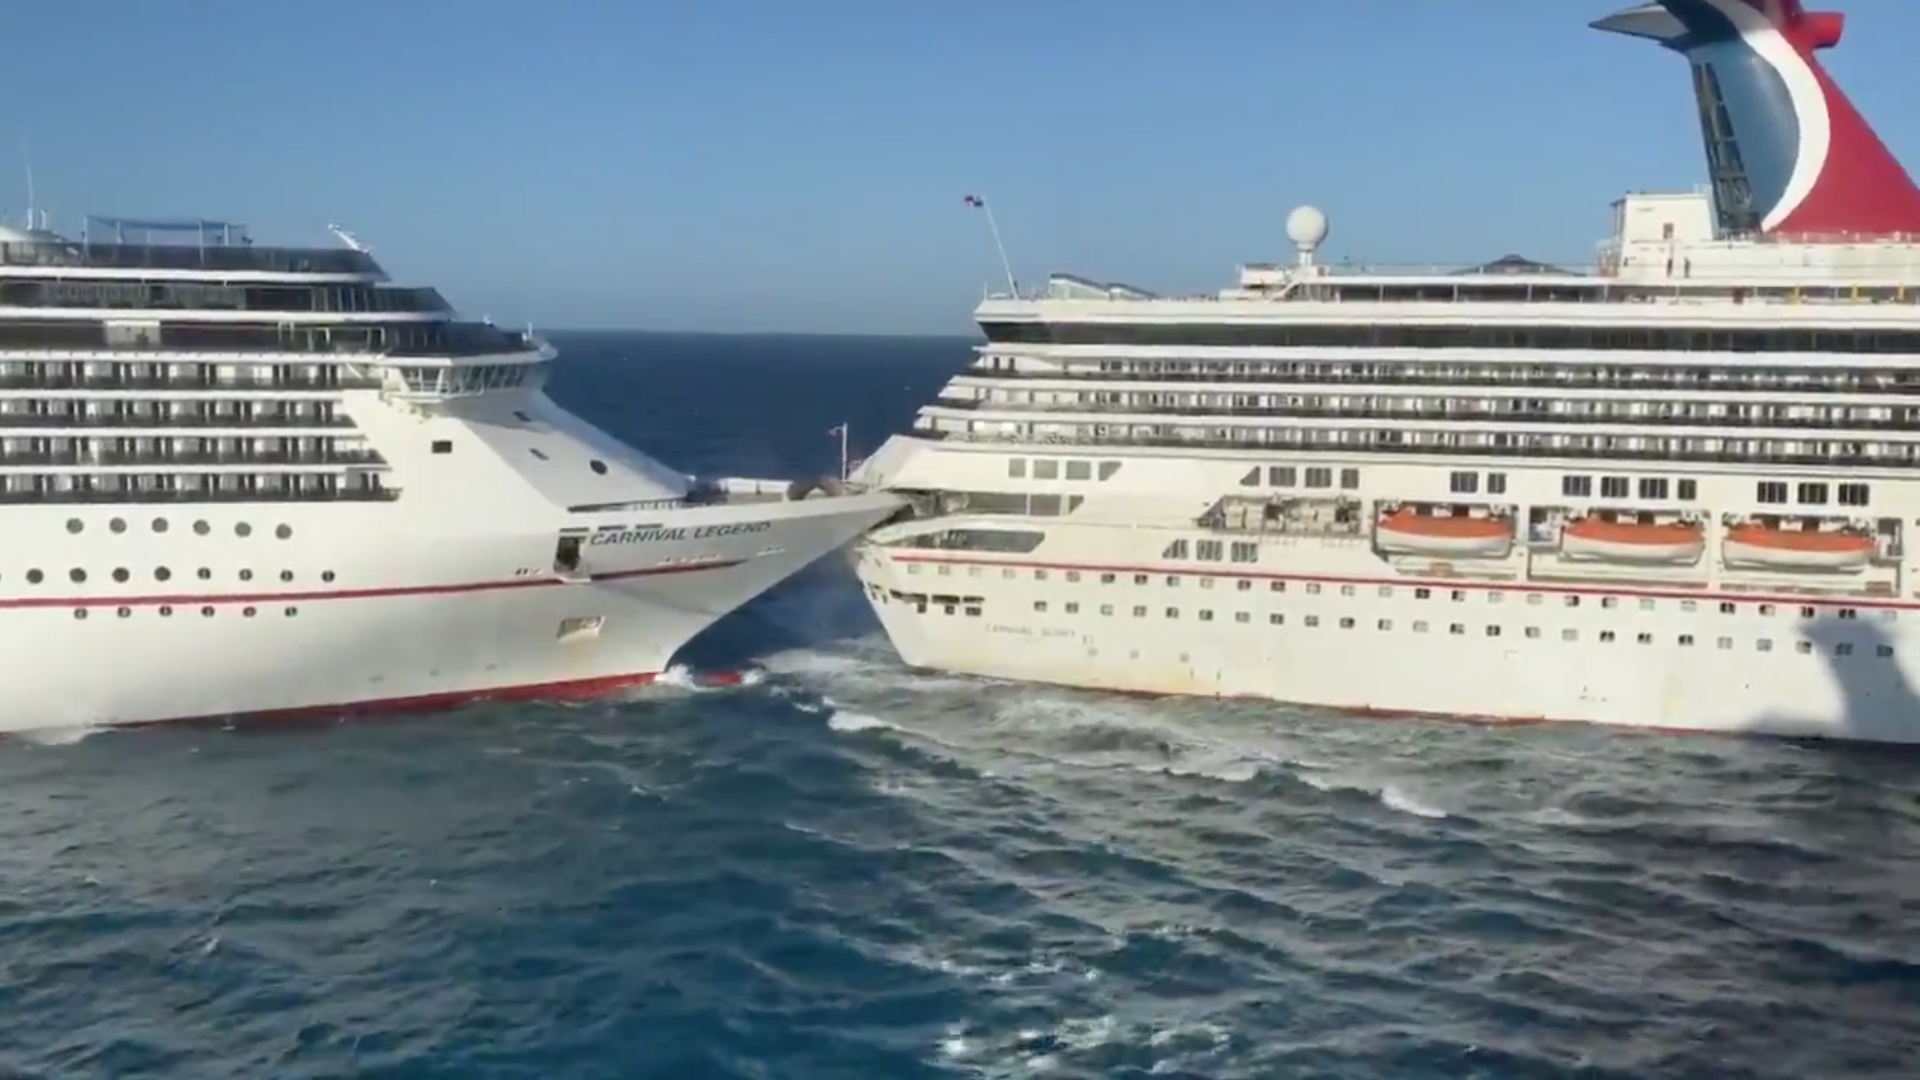 New Orleansbased Carnival cruise ship collides with another ship in